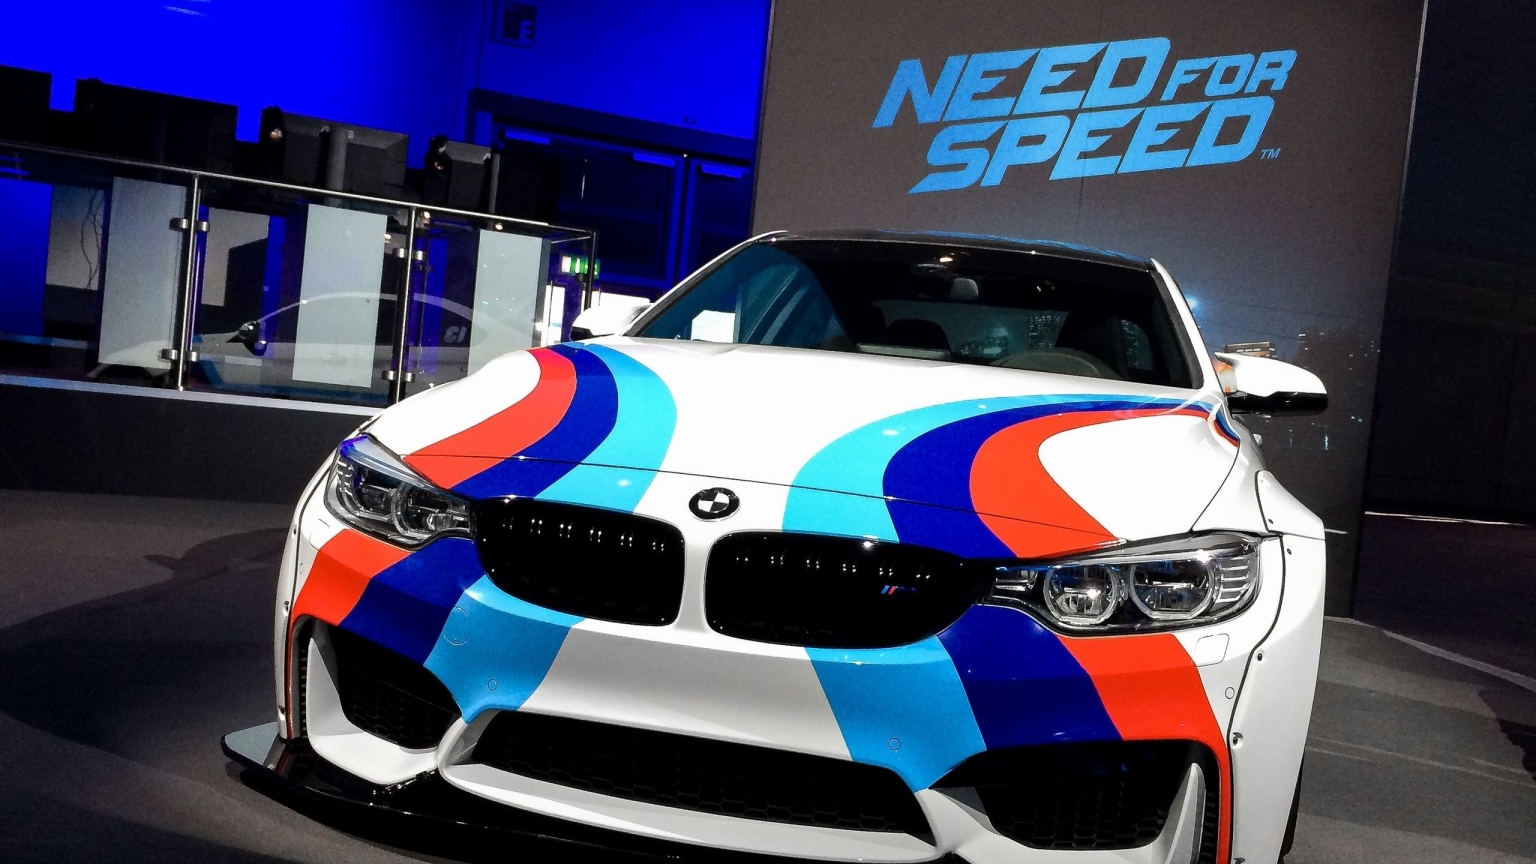 Need For Speed BMW for 1536 x 864 HDTV resolution